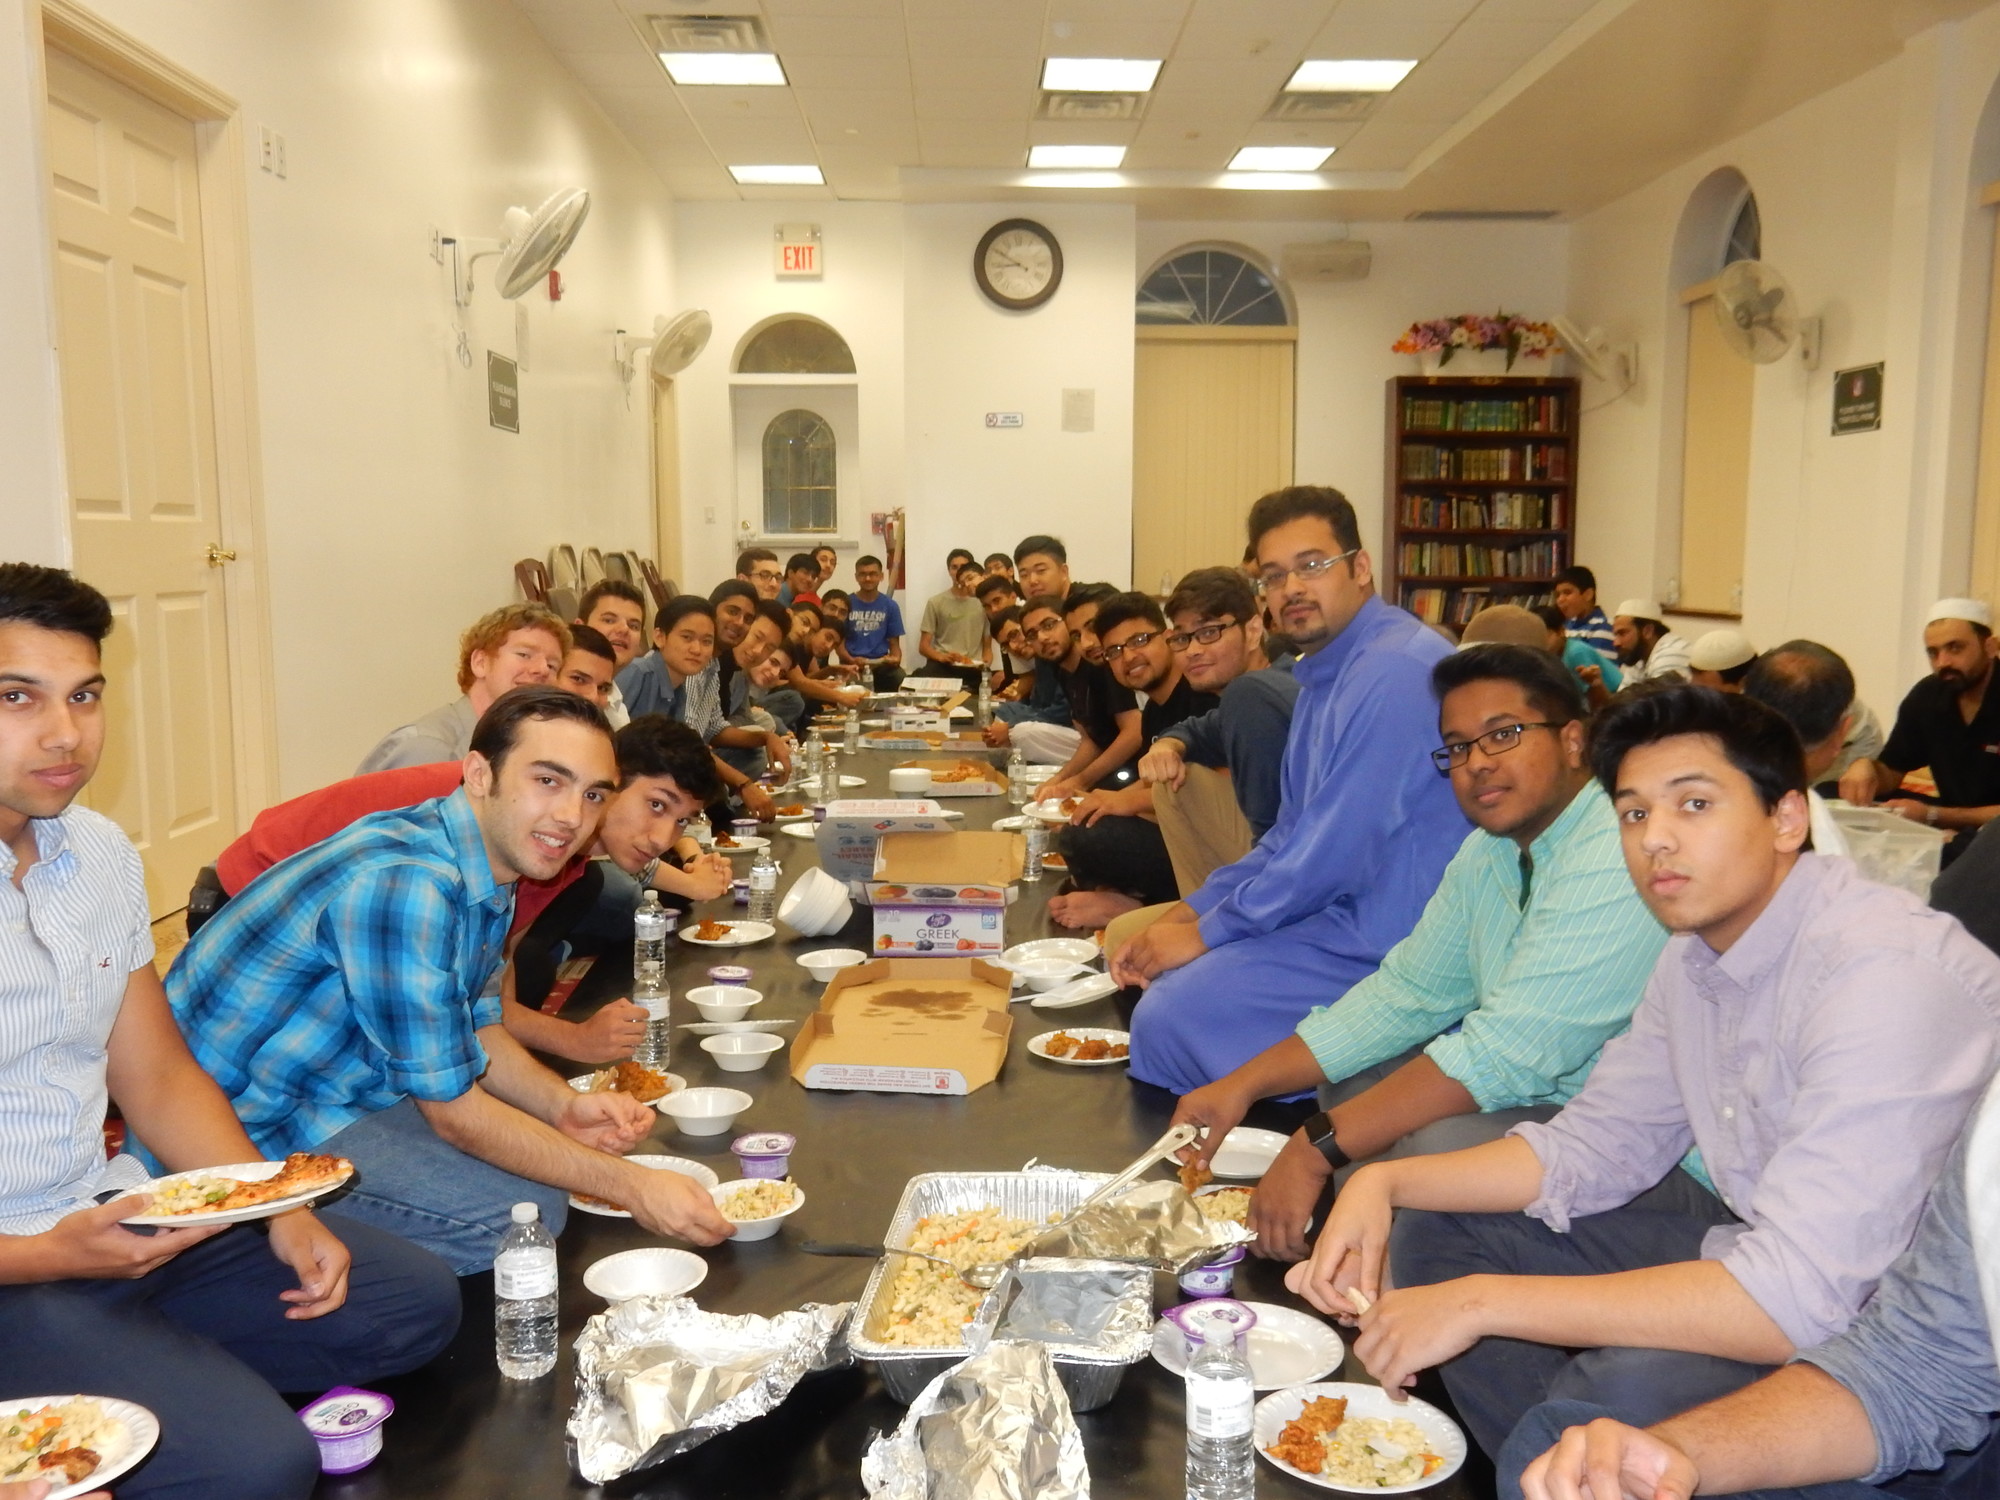 A feast celebrated the successful interfaith session as well as the day’s observance of Ramadan.